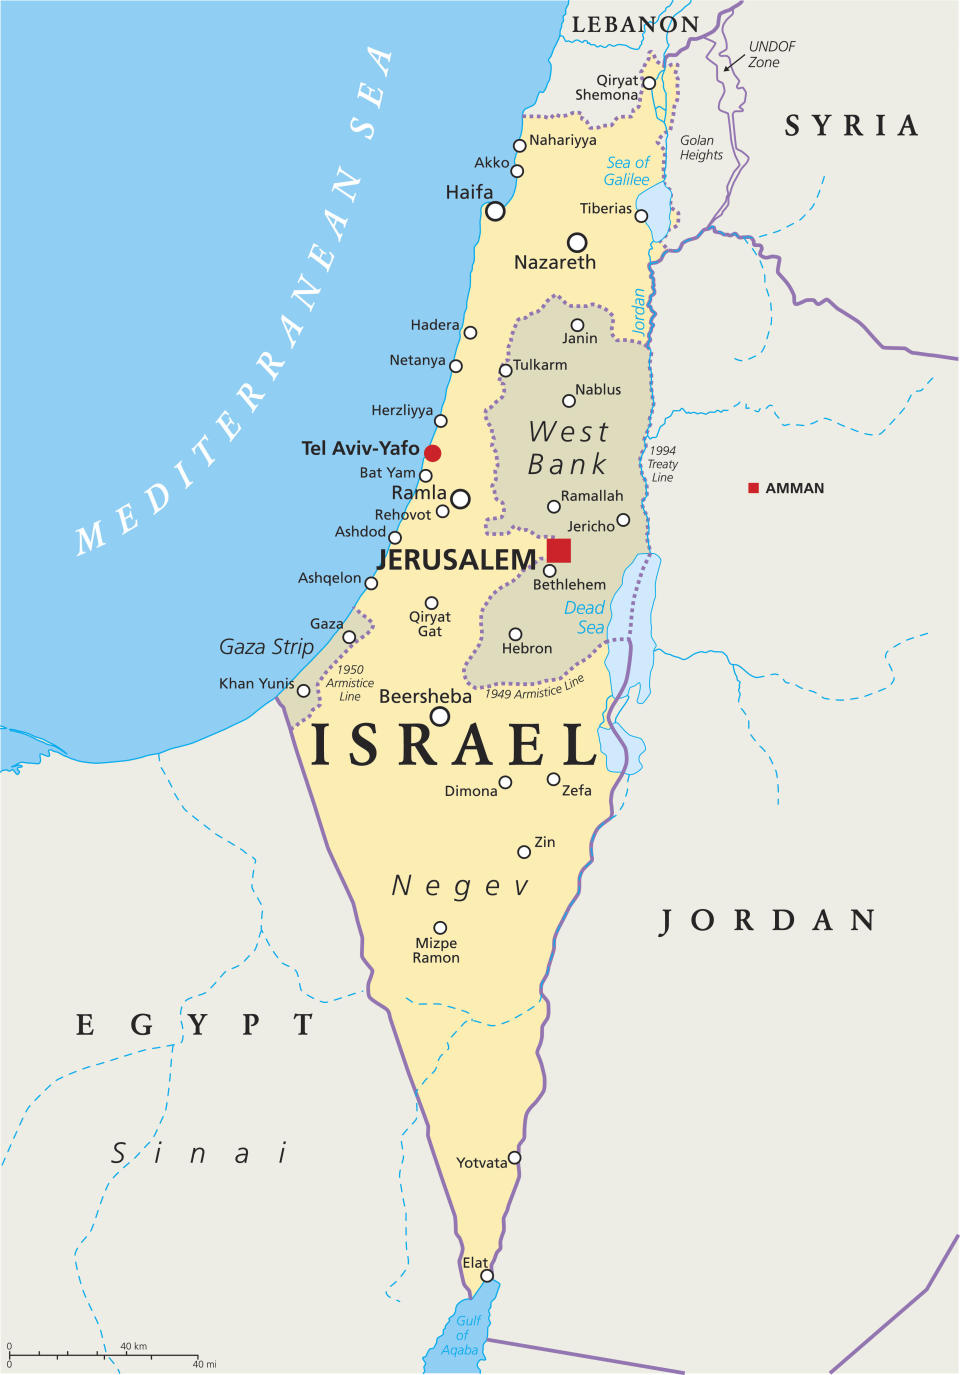 A map shows Israel, with Jerusalem and other major cities labeled, along with the Palestinian territories of the Israeli-occupied West Bank and the Hamas-controlled Gaza Strip. / Credit: Getty/iStockphoto